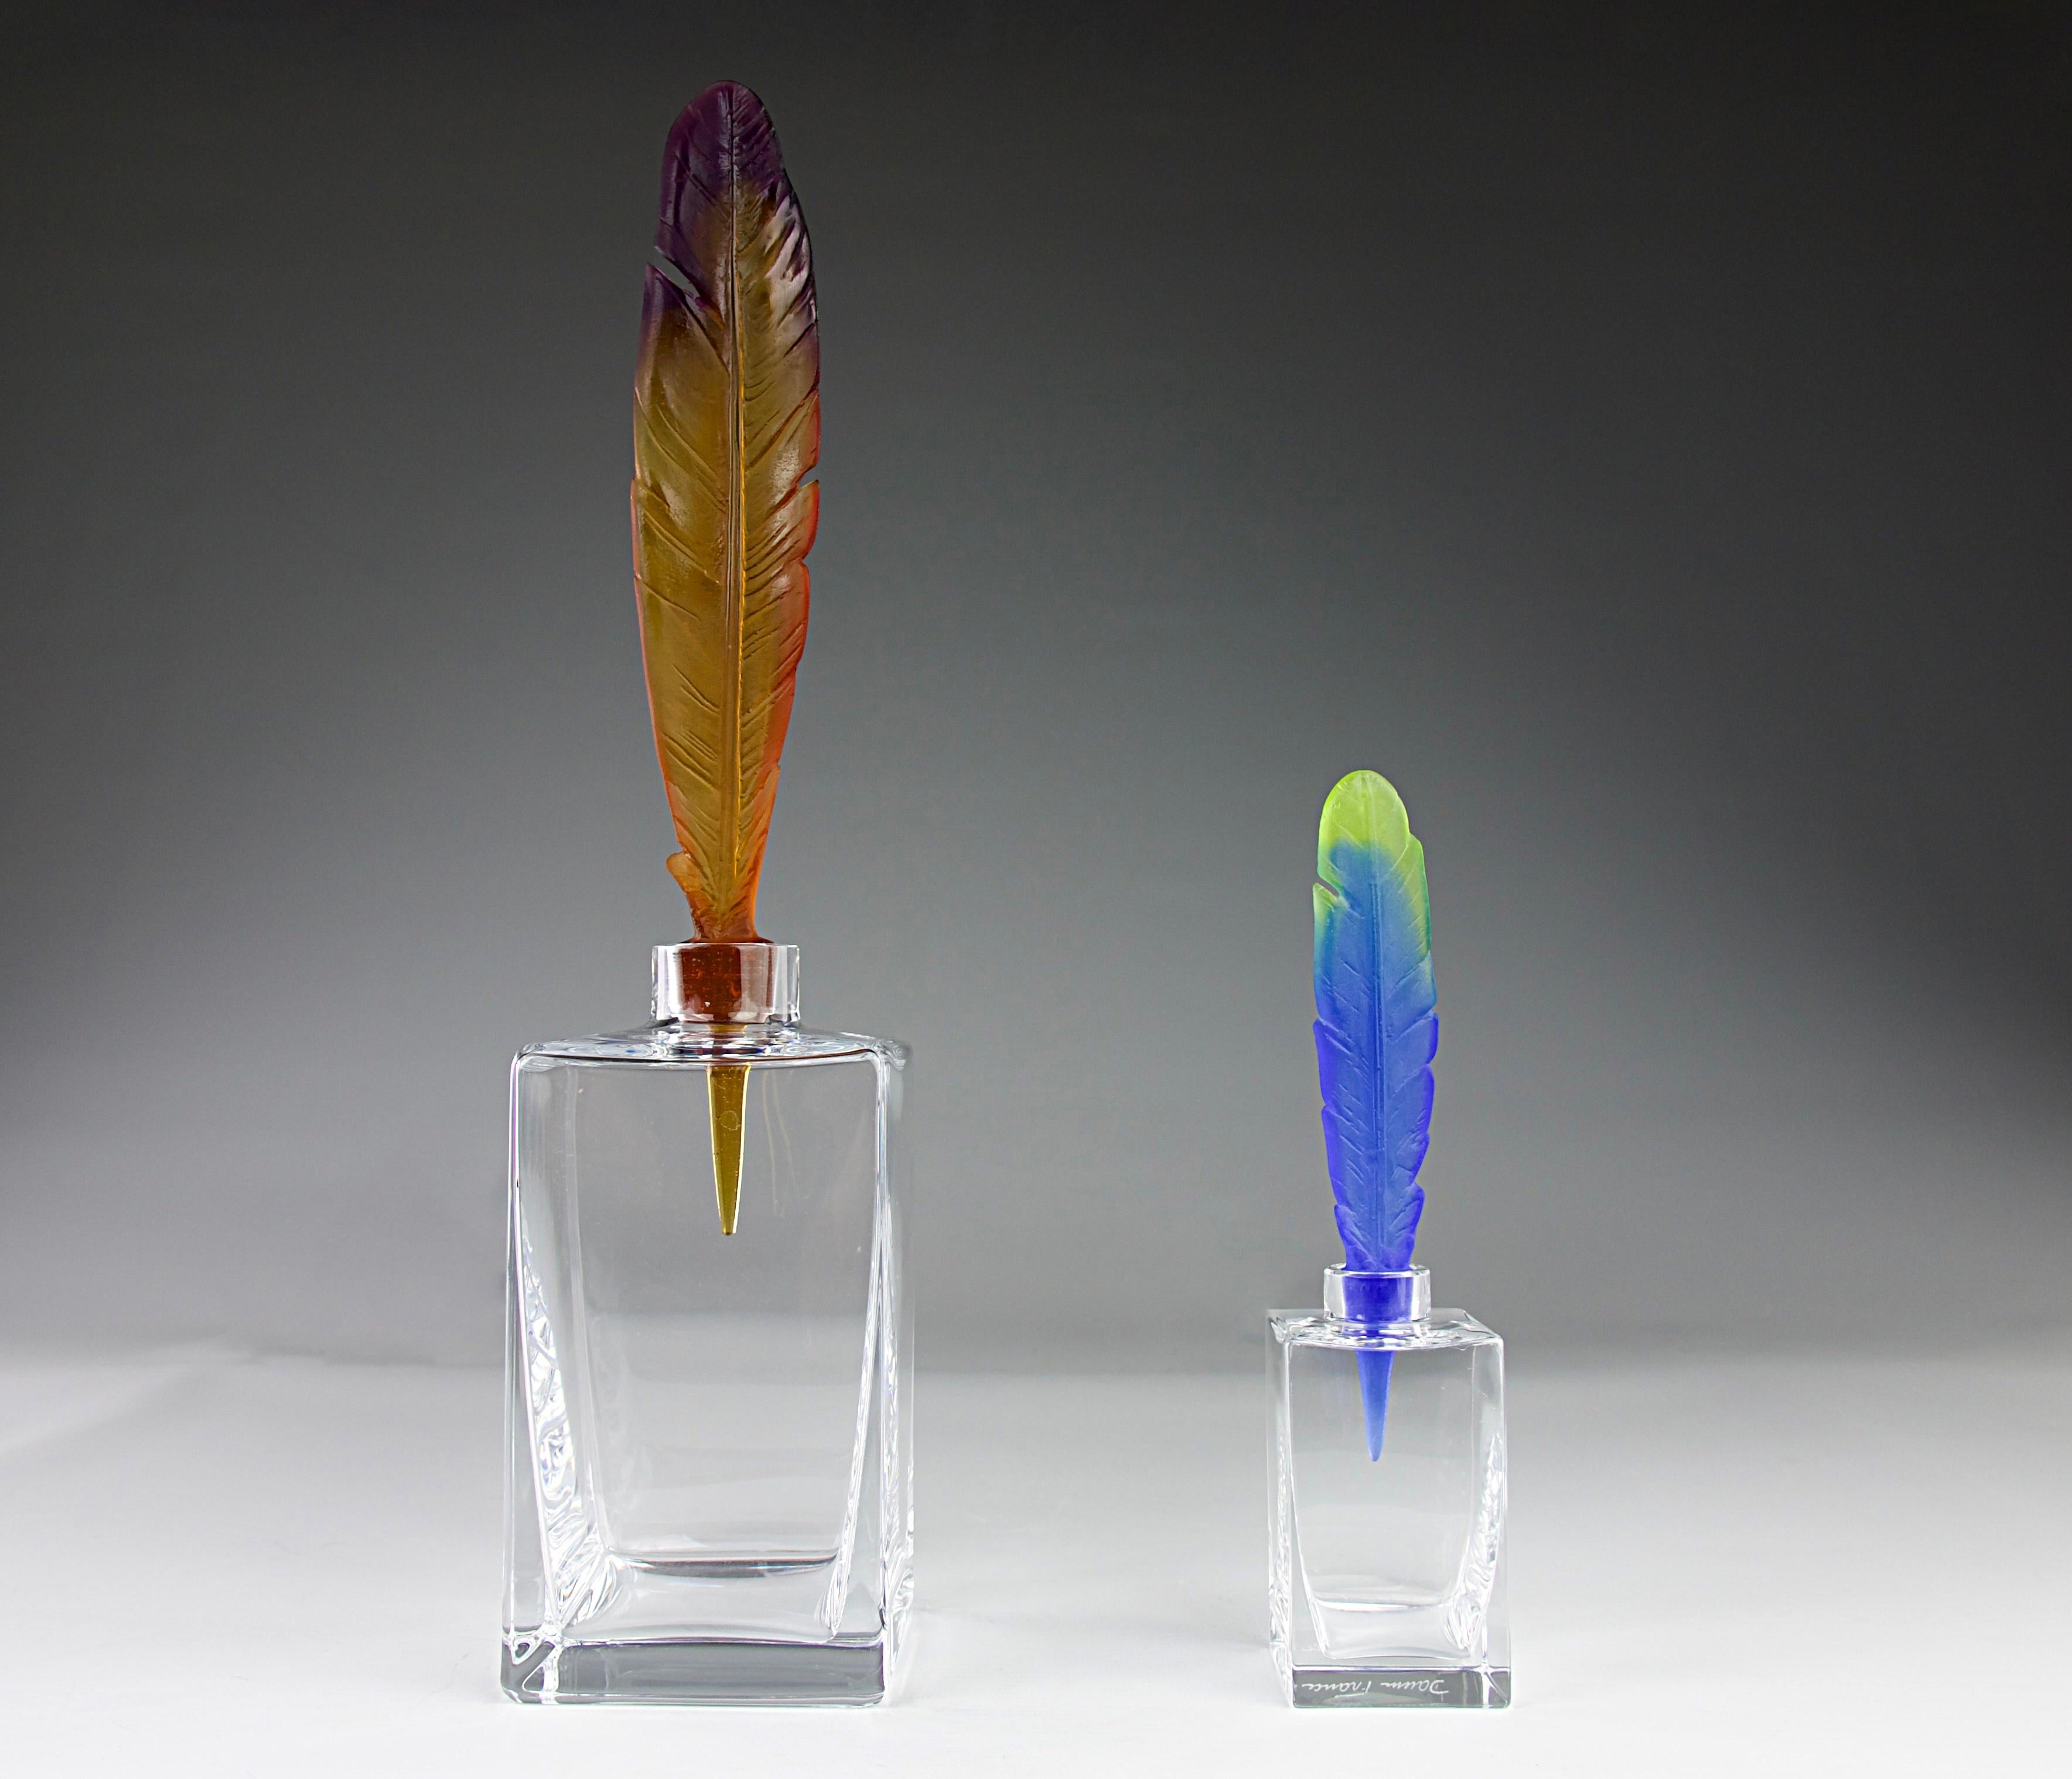 Superb 'Cheyenne' carafe service designed by Hilton McConnico for Daum. Stopper of the carafe in the shape of a feather quill. Blue model named Cheyenne Amethyst and brown model Cheyenne Amber.

In very good condition.

Dimensions in cm ( H x D )